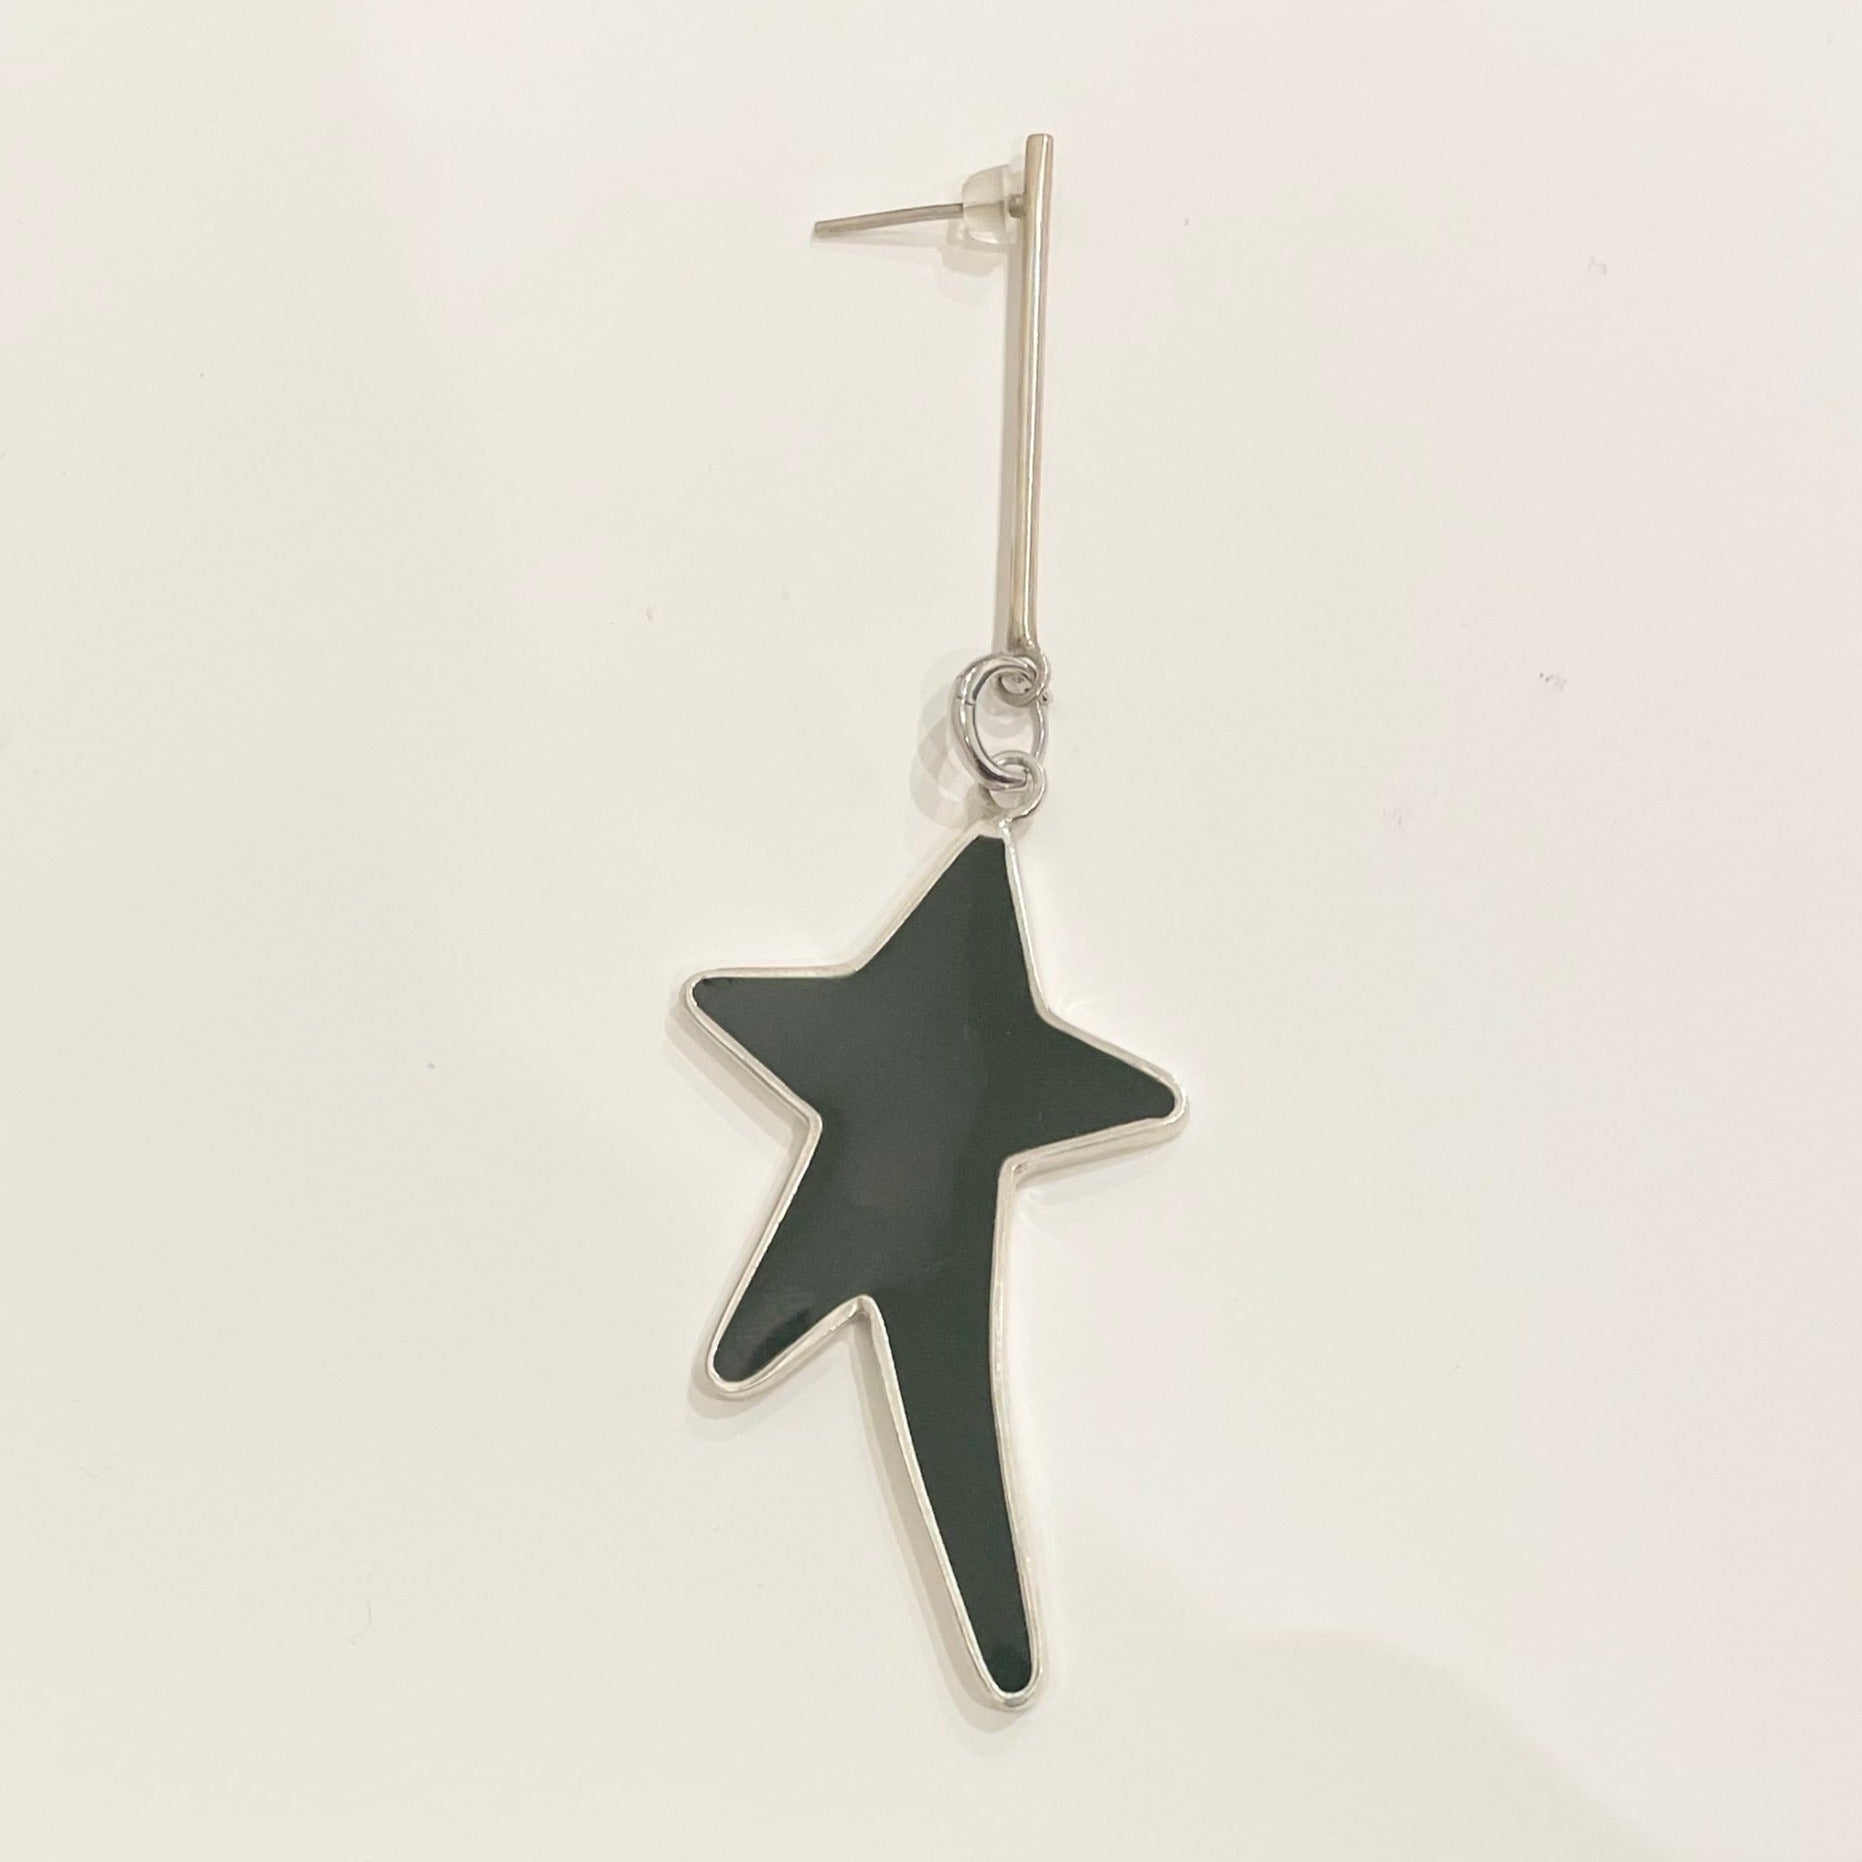 Star silver earring filed with black epoxy resin with long stem.